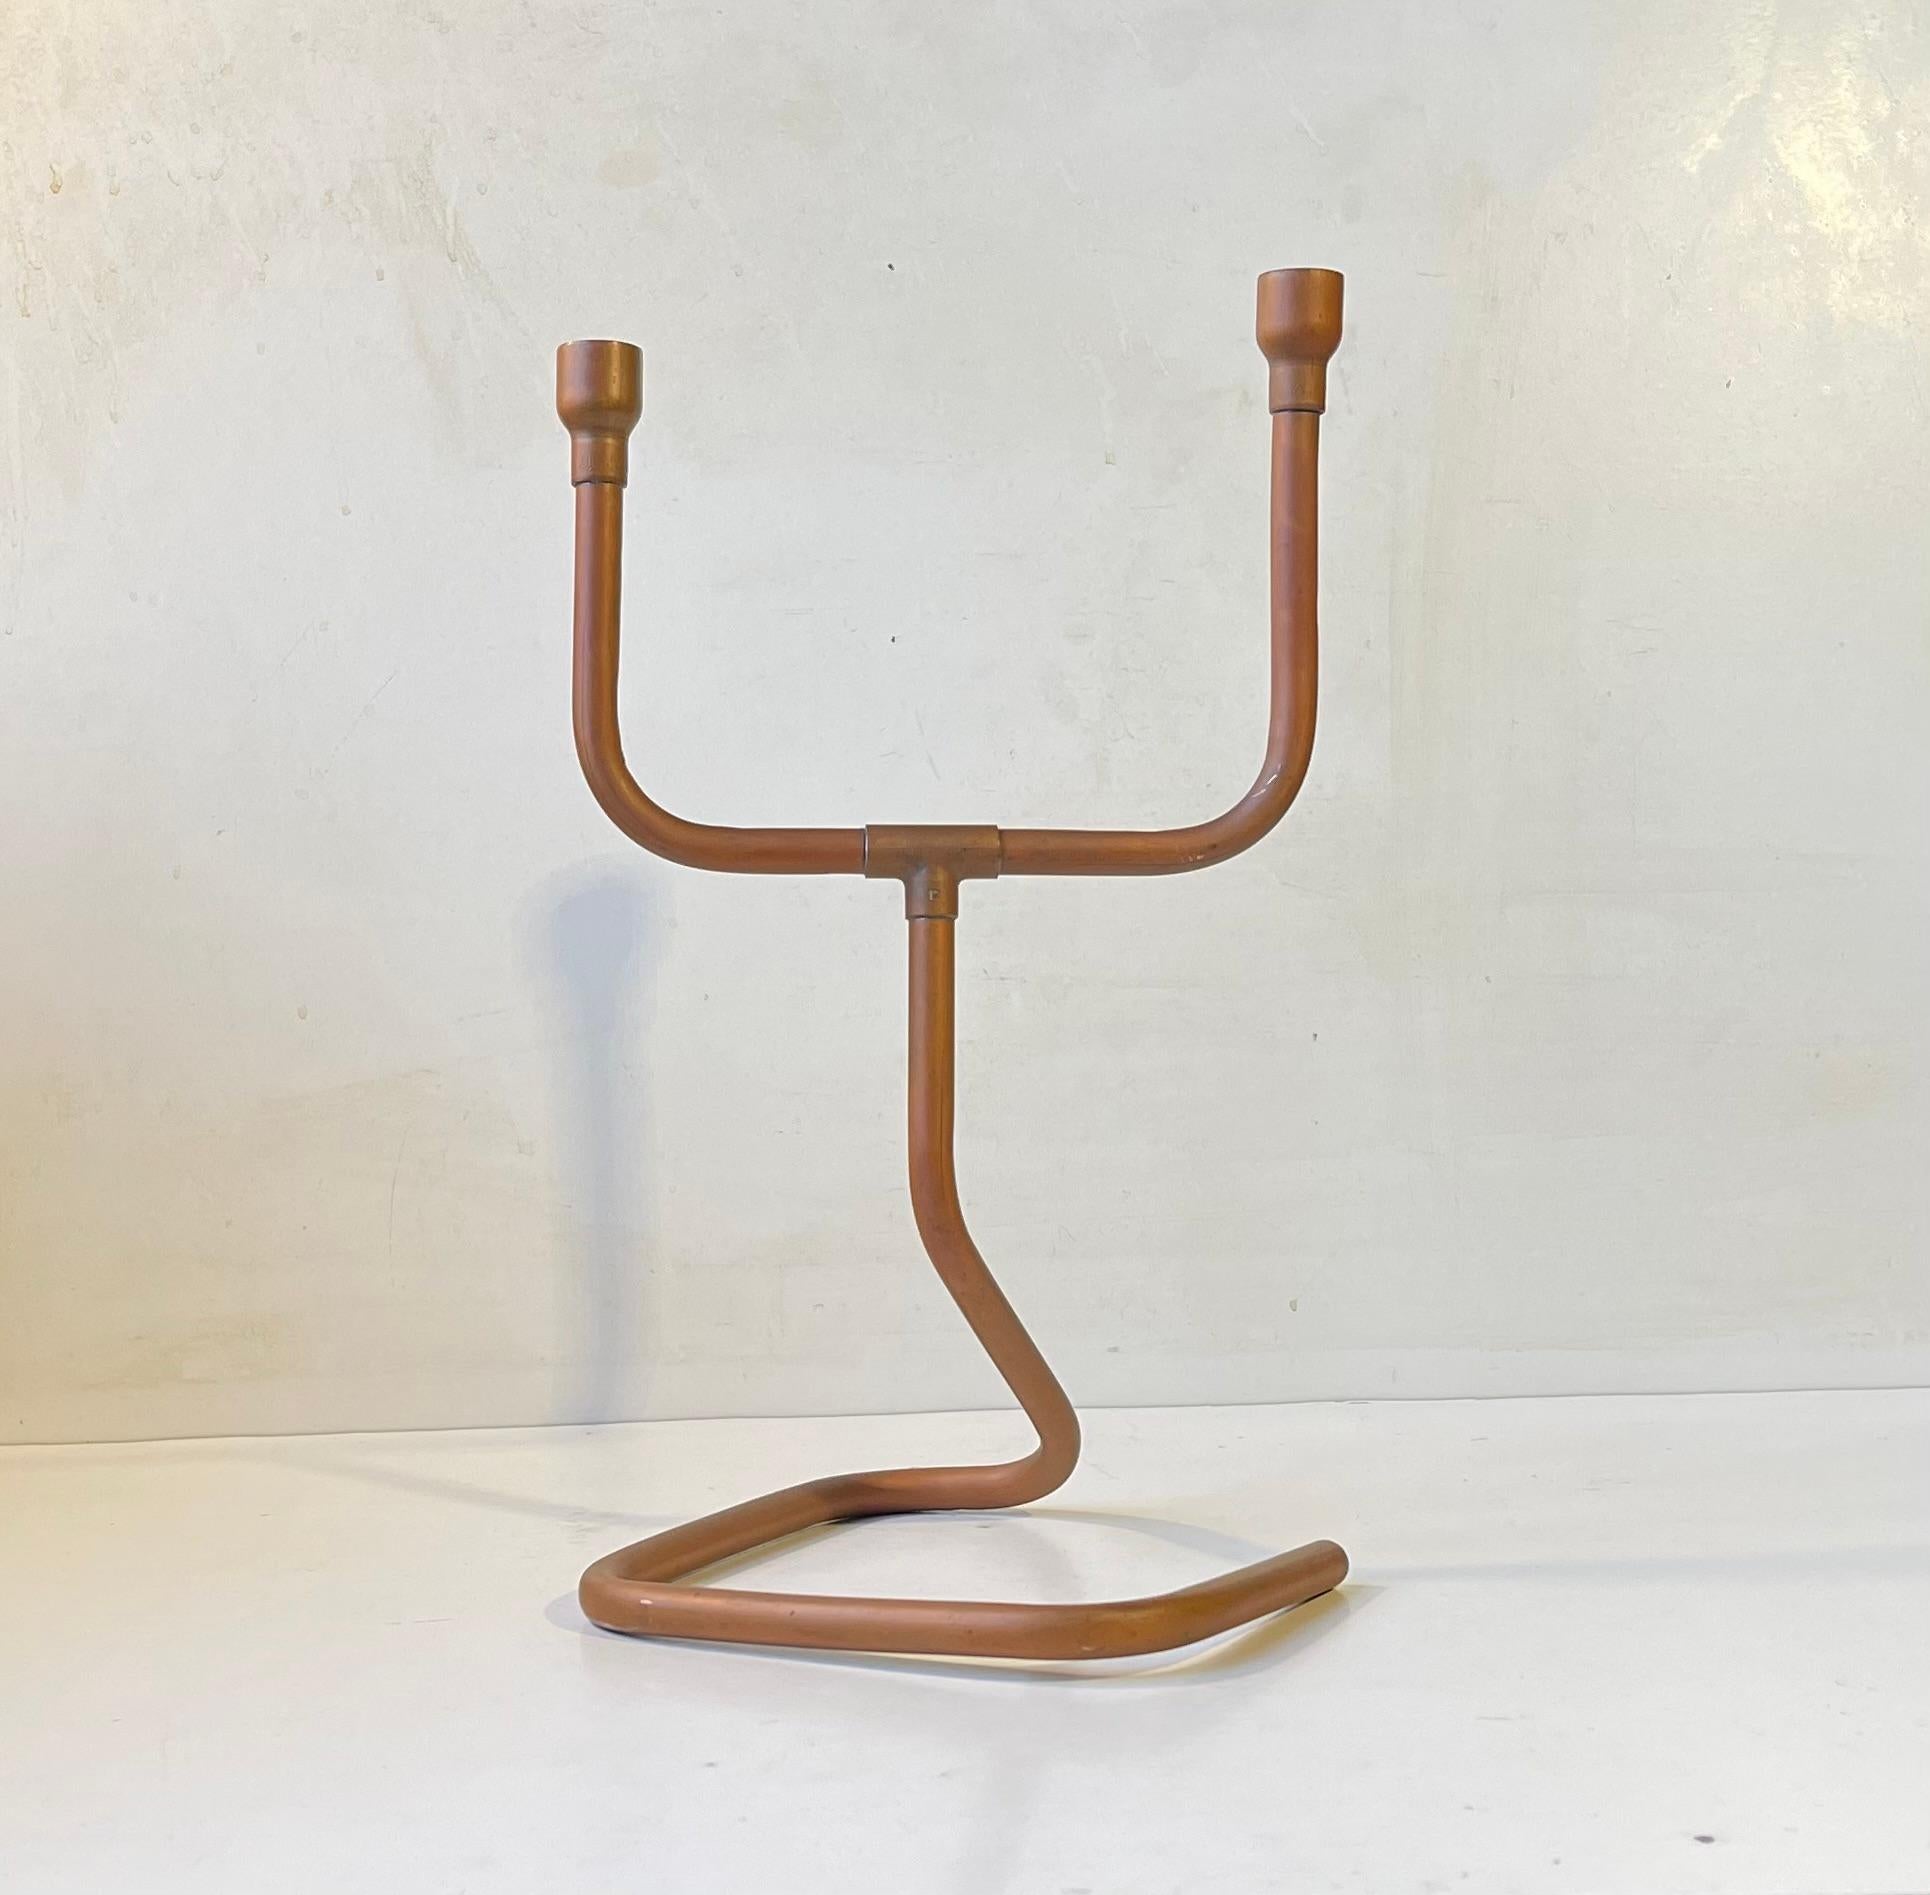 Decorative dual candleholder fashioned from bend solid copper pipes. Naturally patinated over the years. Anonymous danish metal worker/artist circa 1970. It is to be fitted with regular sized candles. Measurements: H: 33/31.5 cm, W: 19 cm, Dept: 21